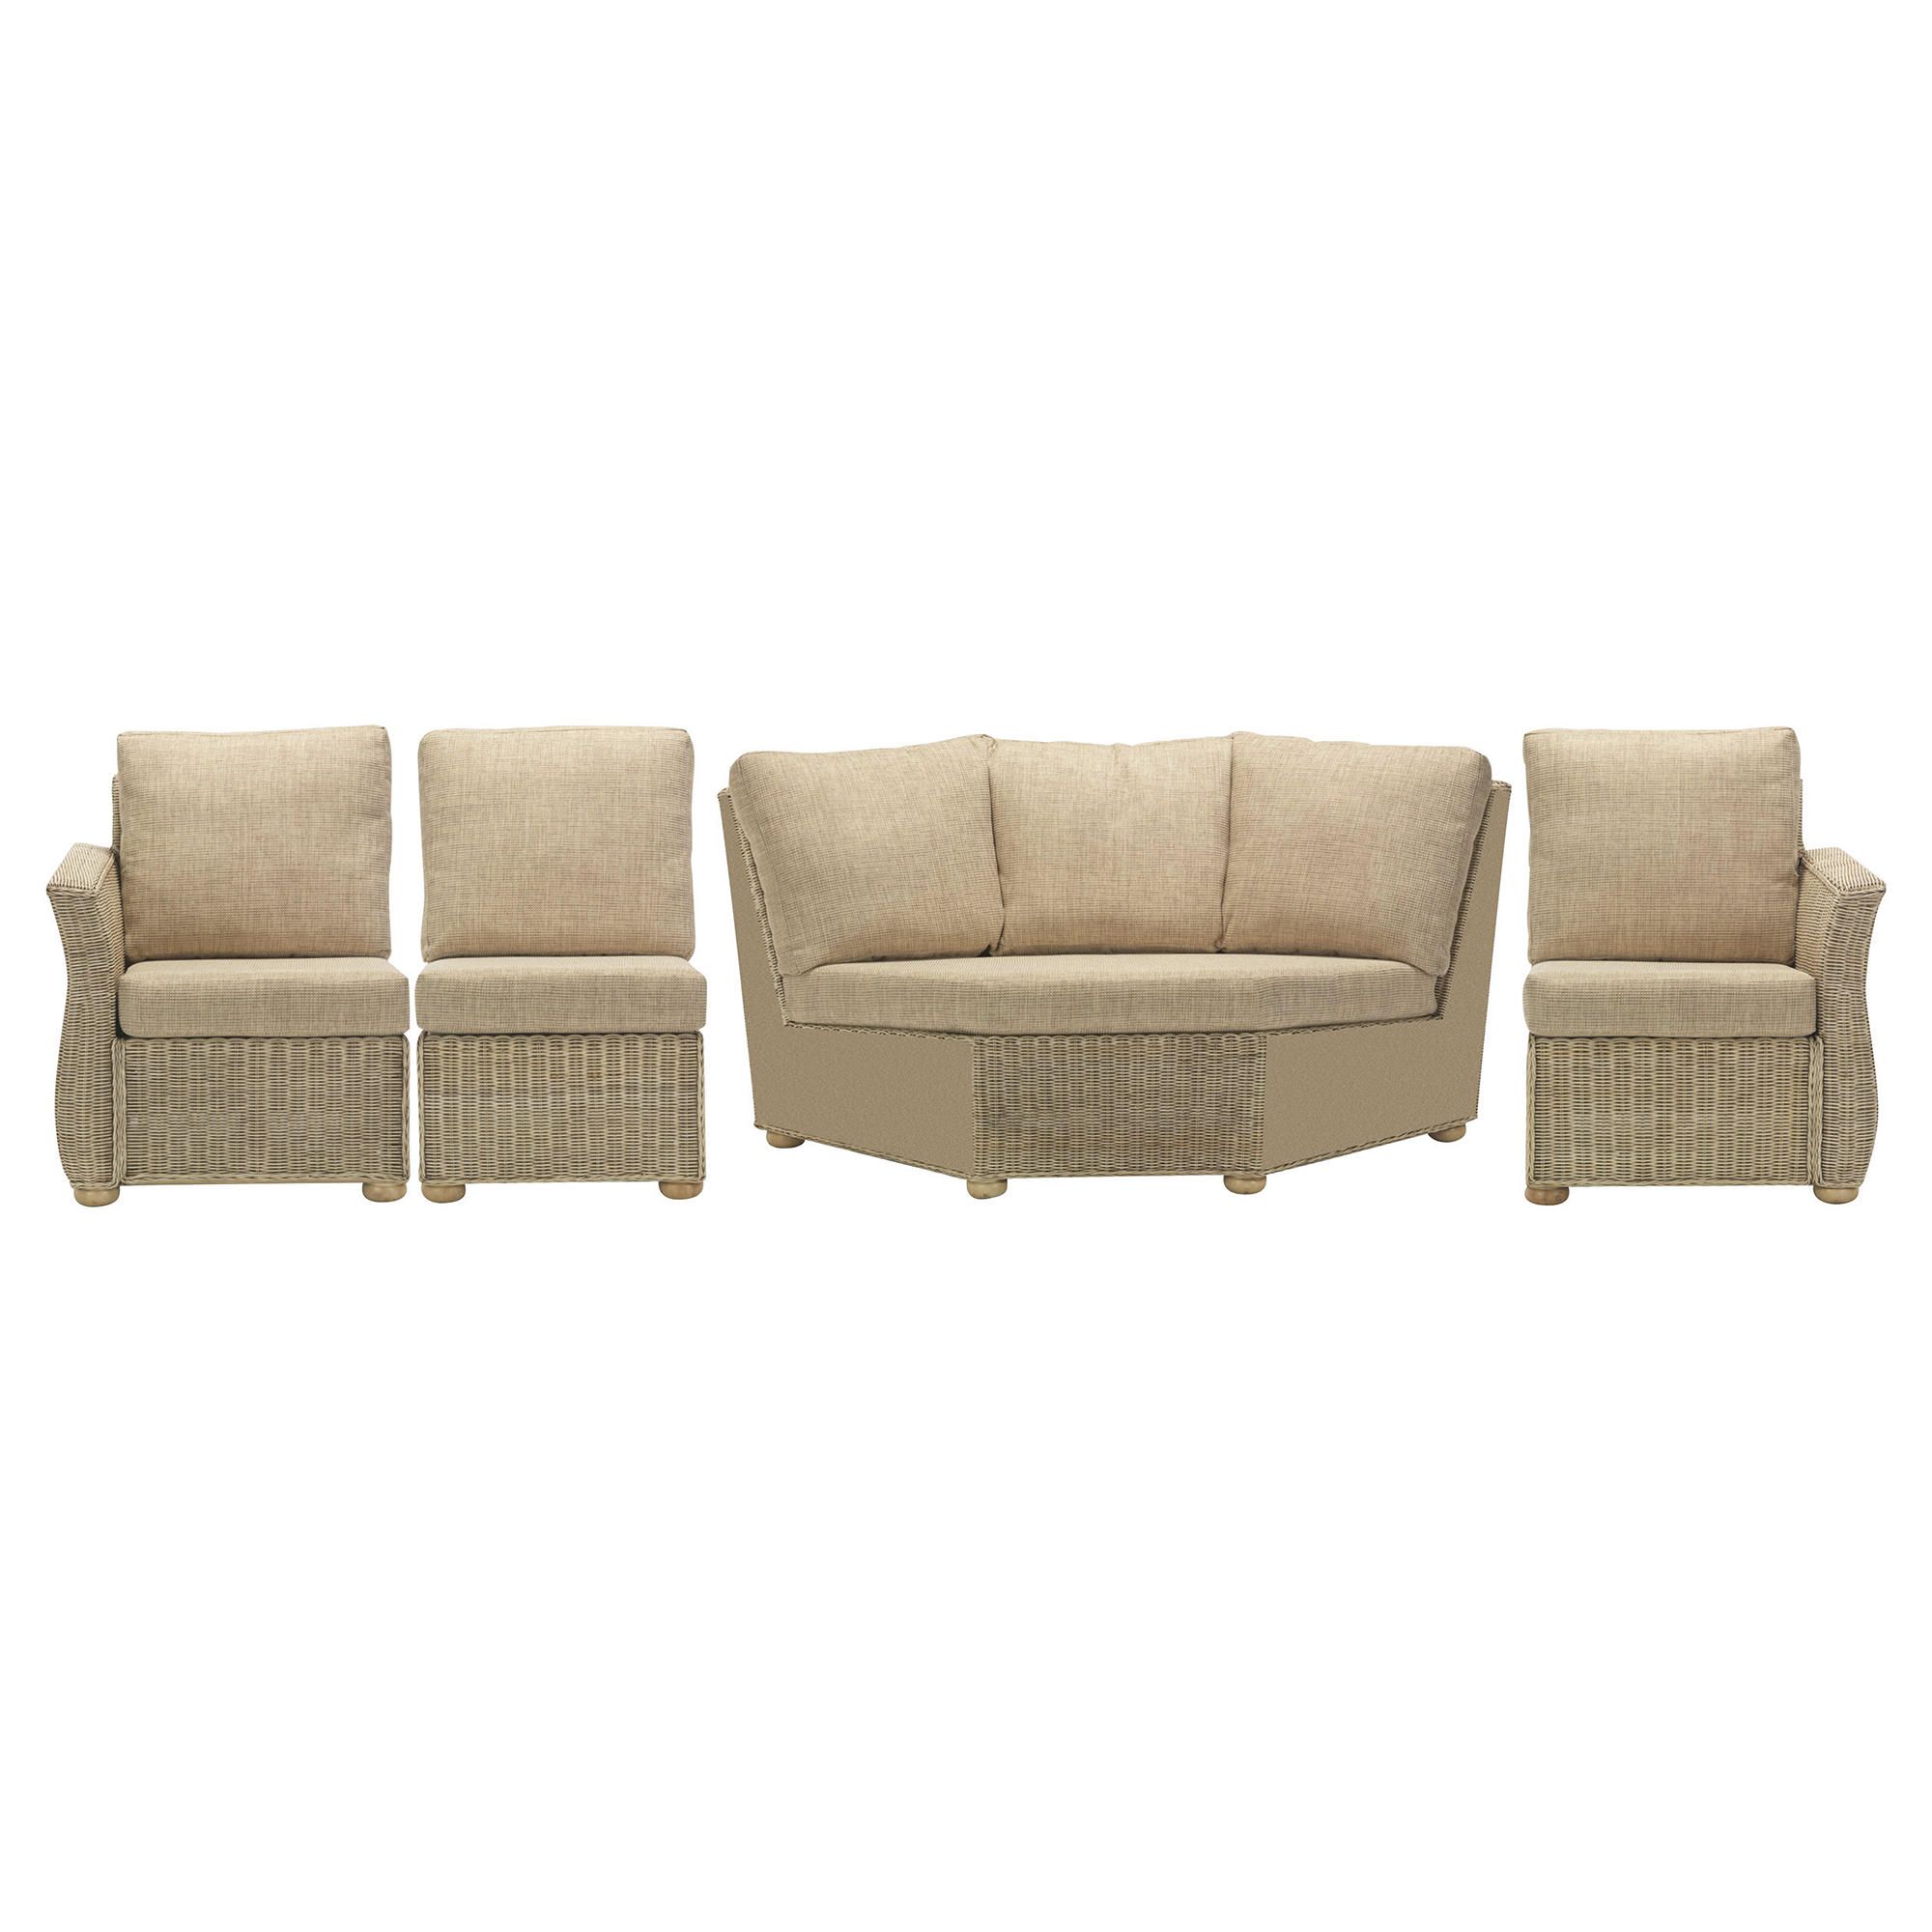 Corsica 4 Piece Suite Conservatory Set (Left, Right, Armless & Corner) at Tesco Direct